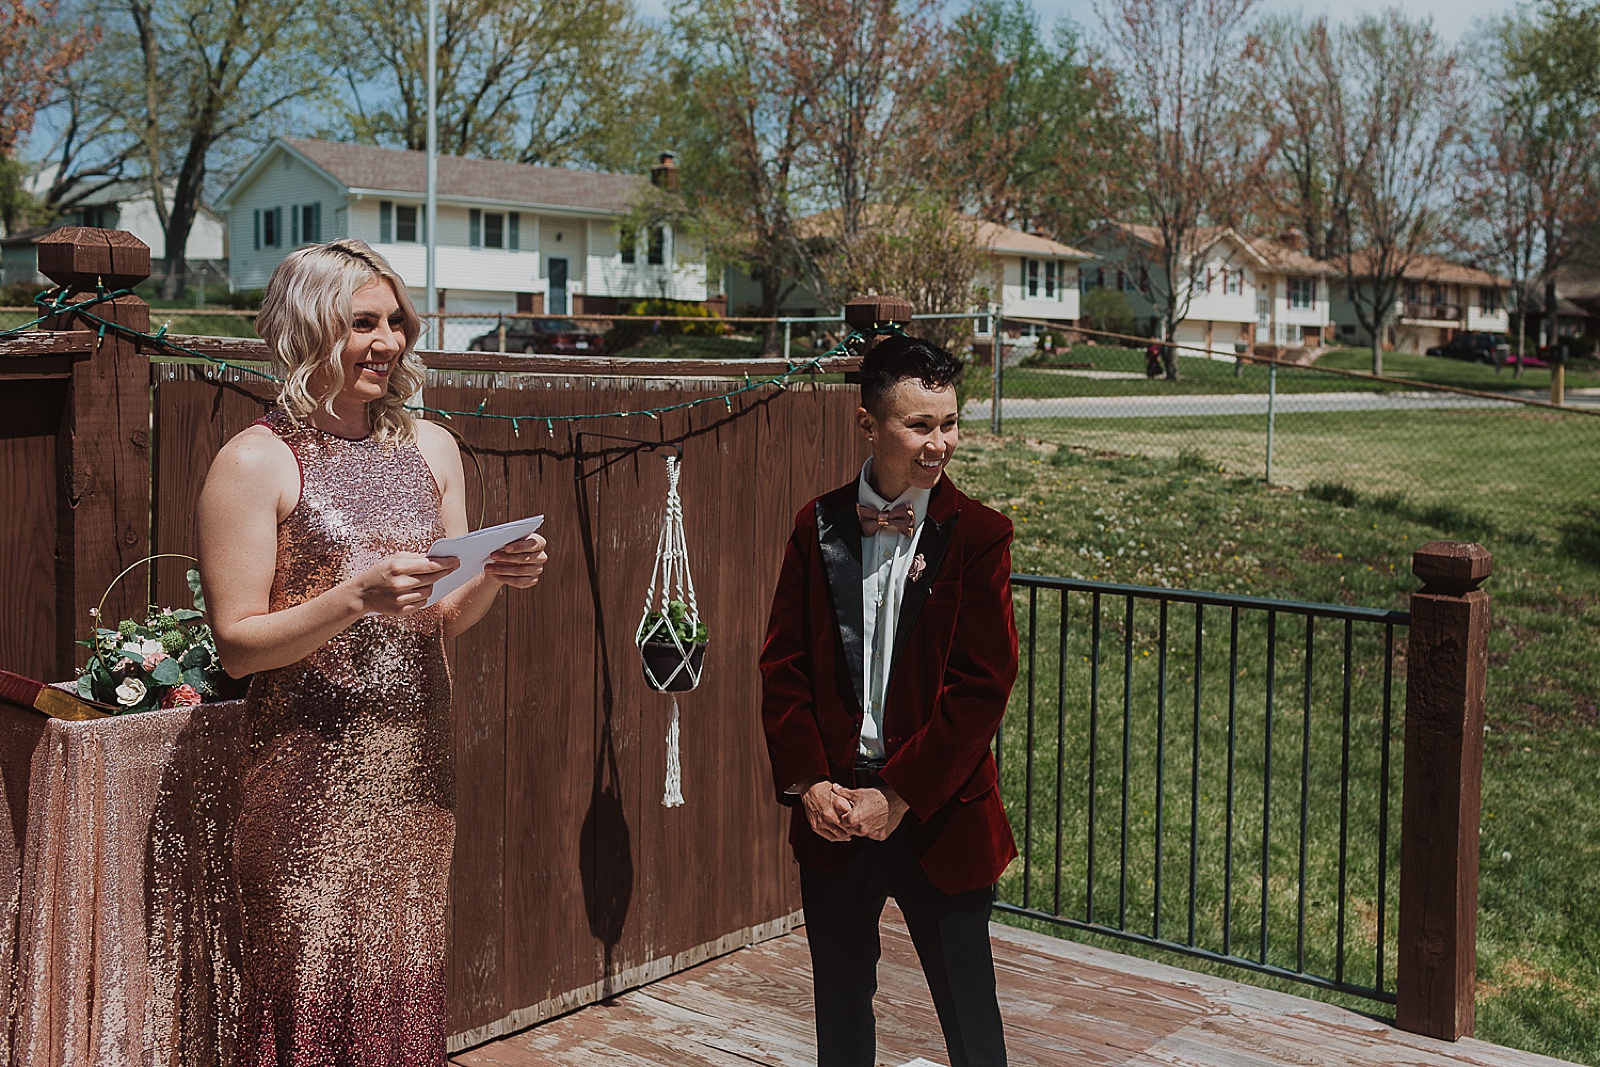 LGBTQ Friendly COVID Elopement by Caitlyn Cloud Photography